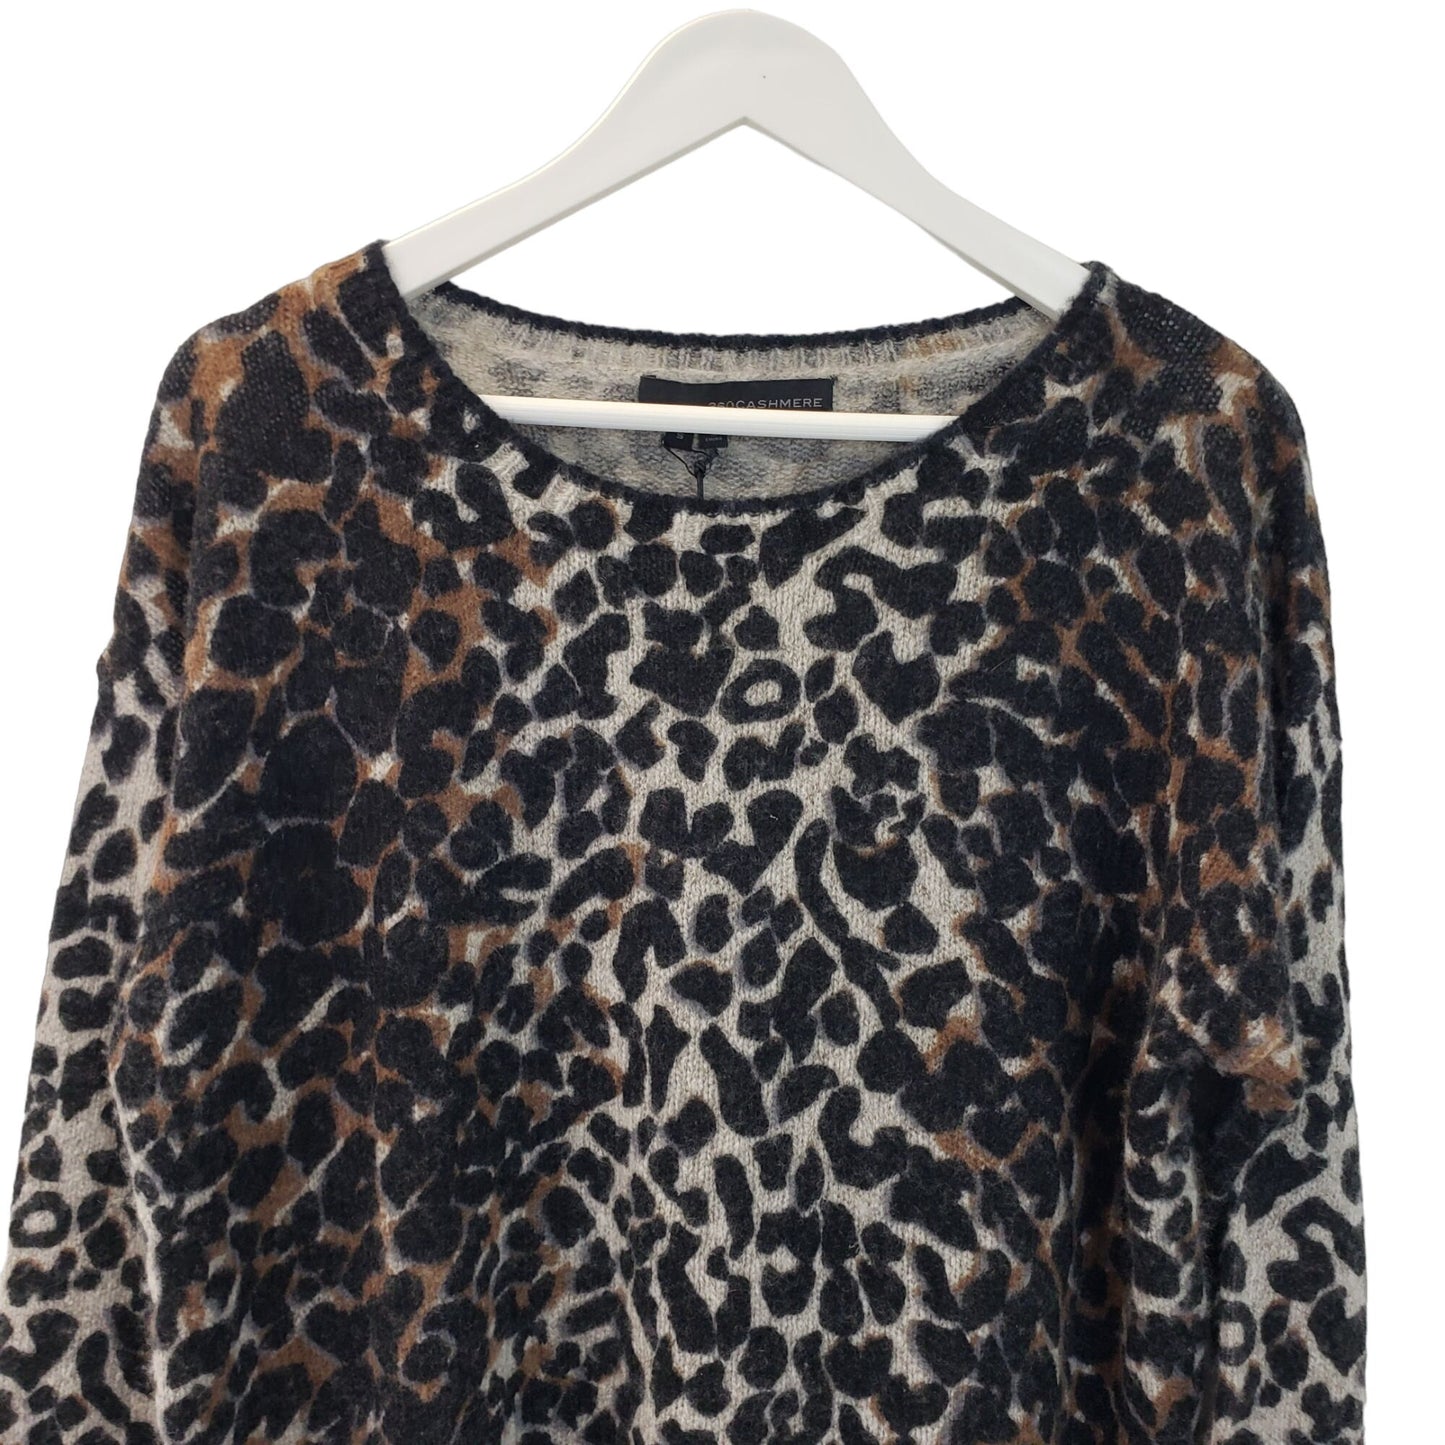 NWT 360 Cashmere Leopard Print Cashmere & Wool Blend Sweater Size Small